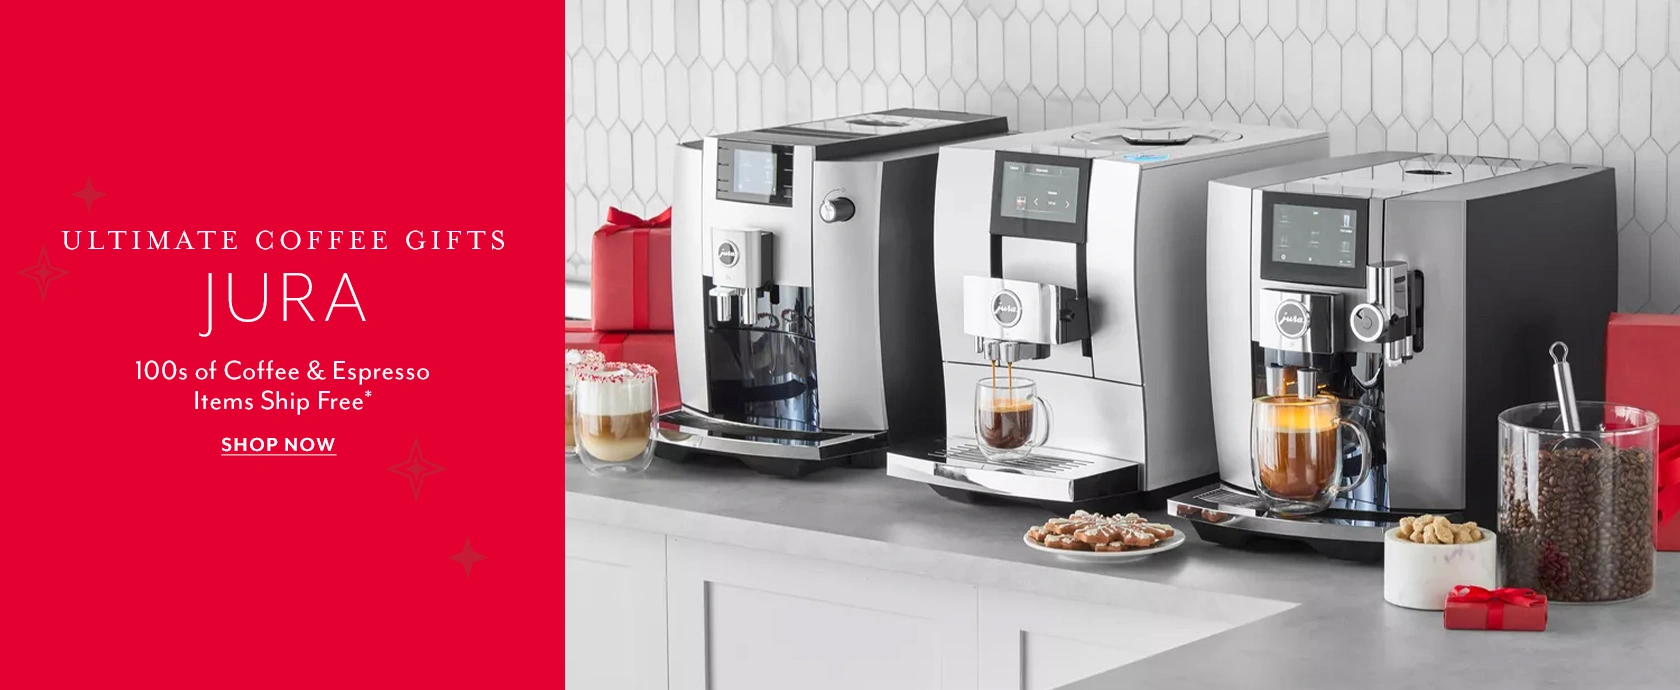 Ultimate Coffee Gifts Jura. 100s of coffee & espresso items ship free. Shop now.